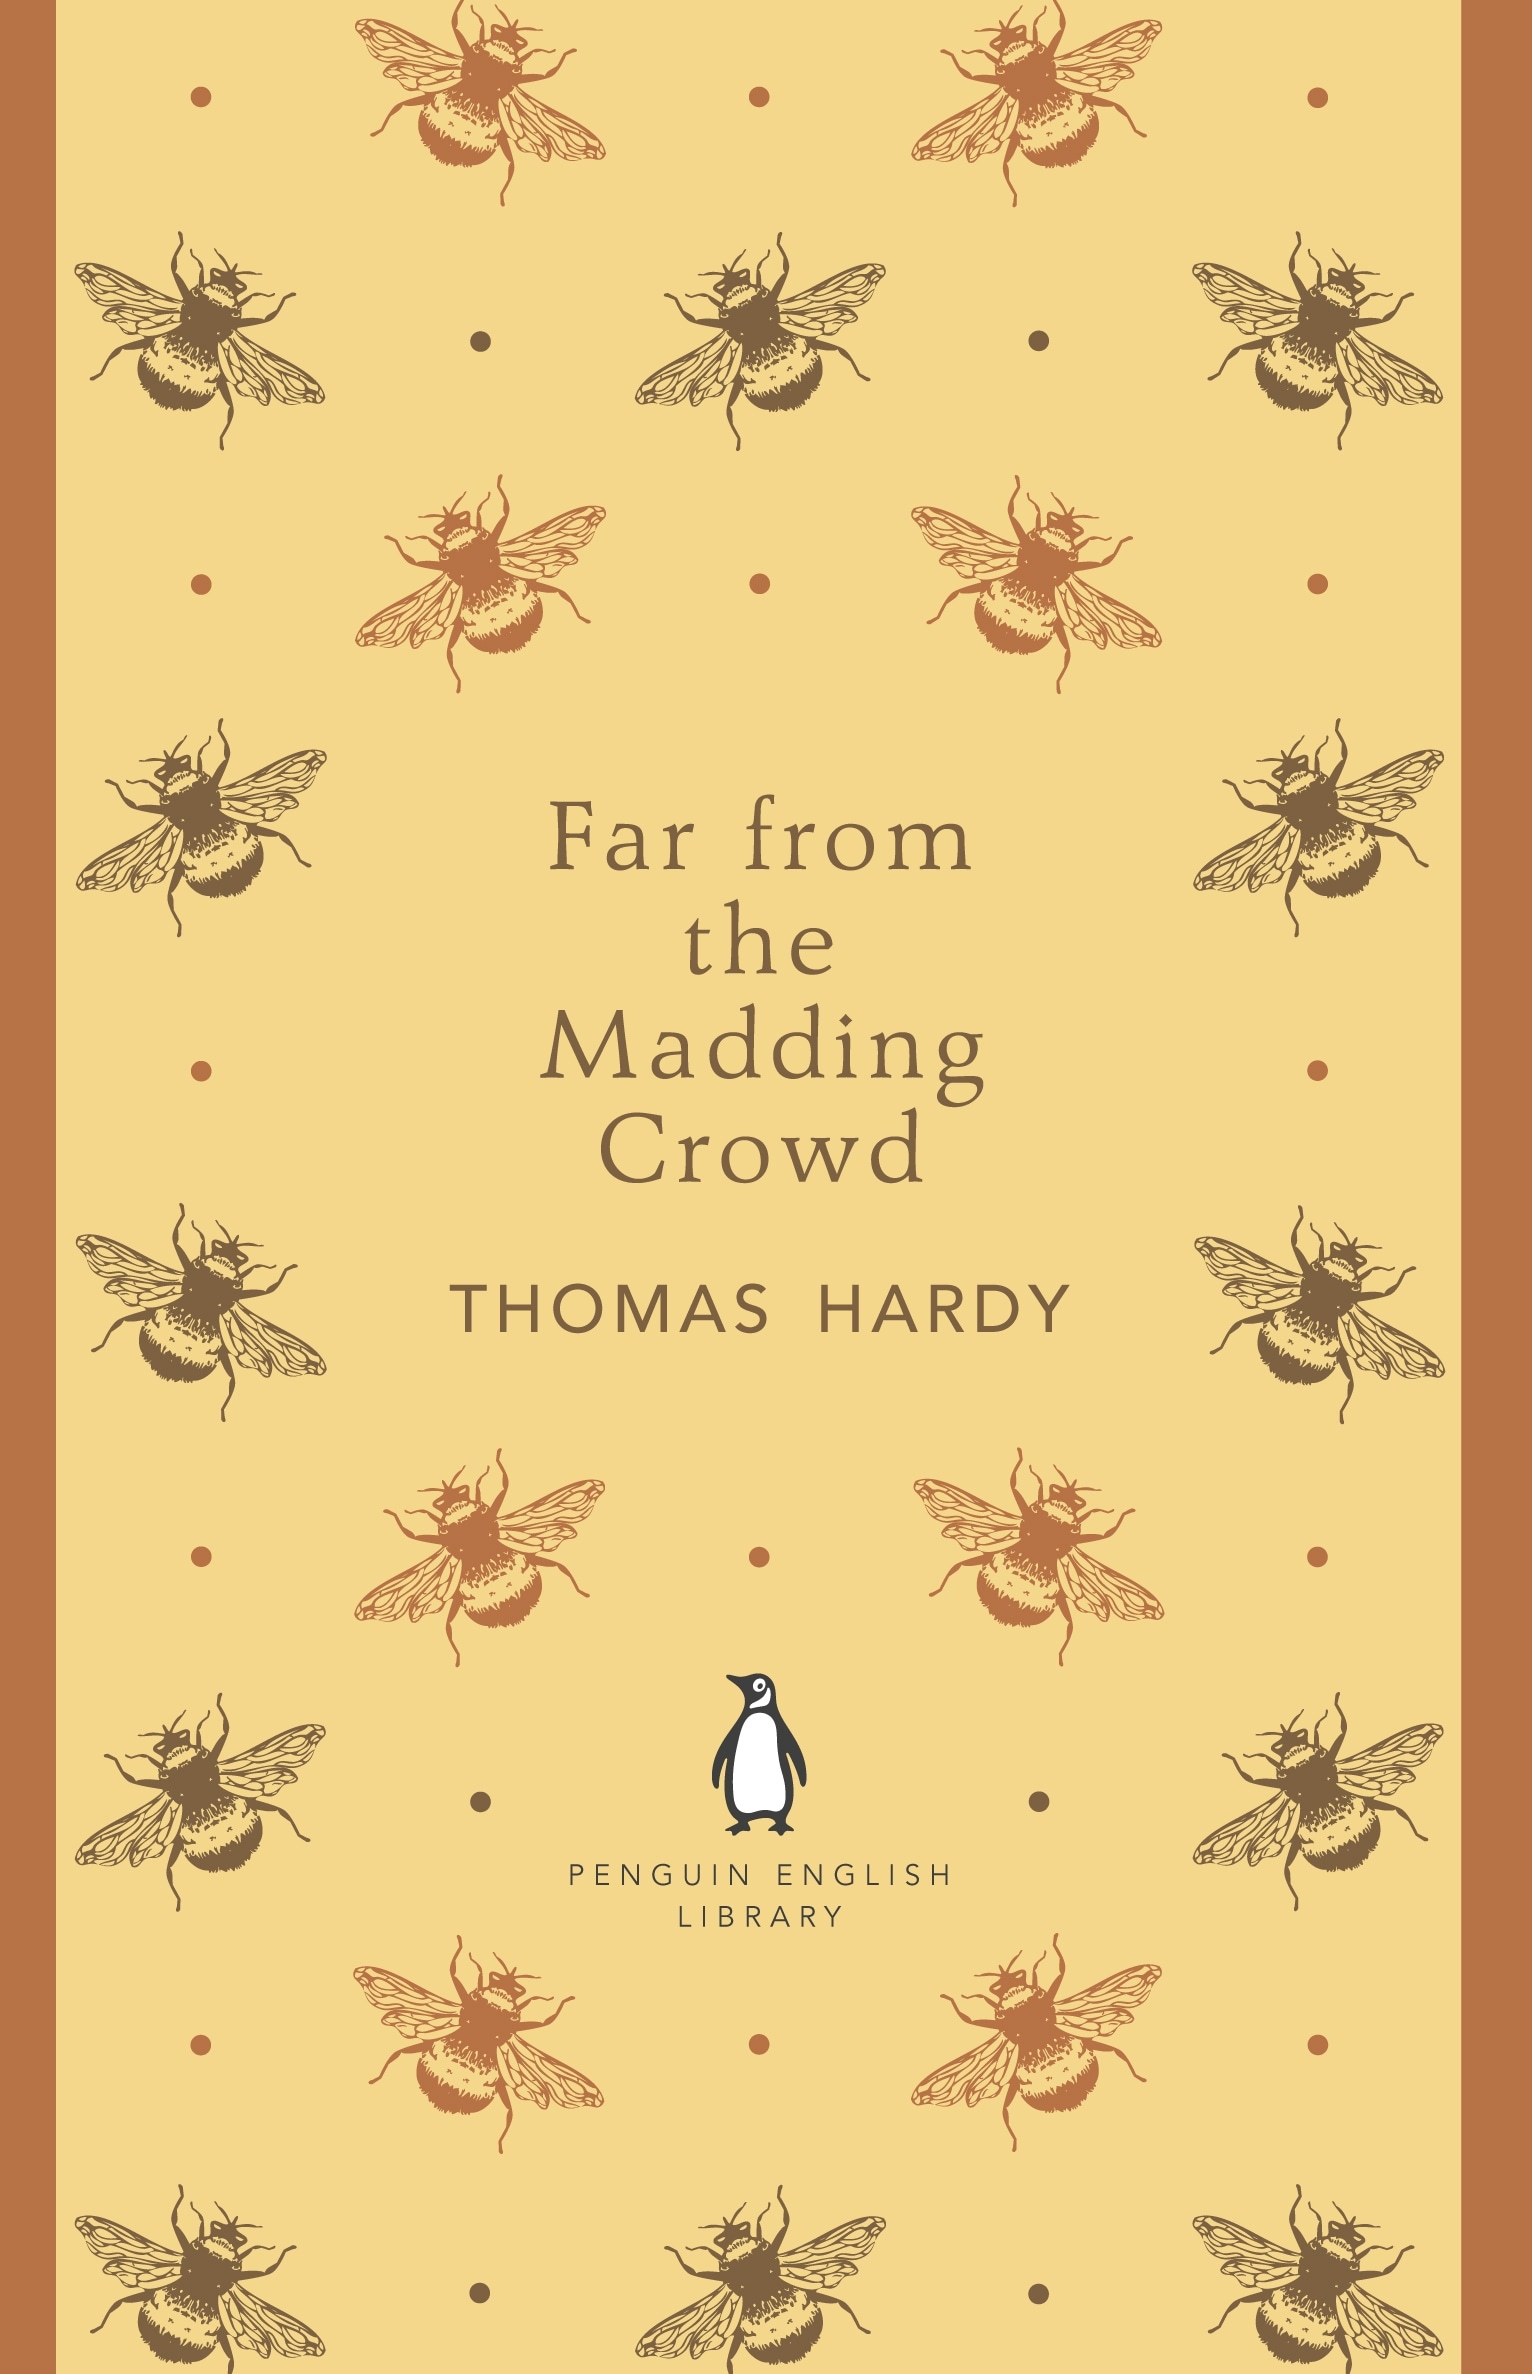 Book “Far From the Madding Crowd” by Thomas Hardy — April 26, 2012